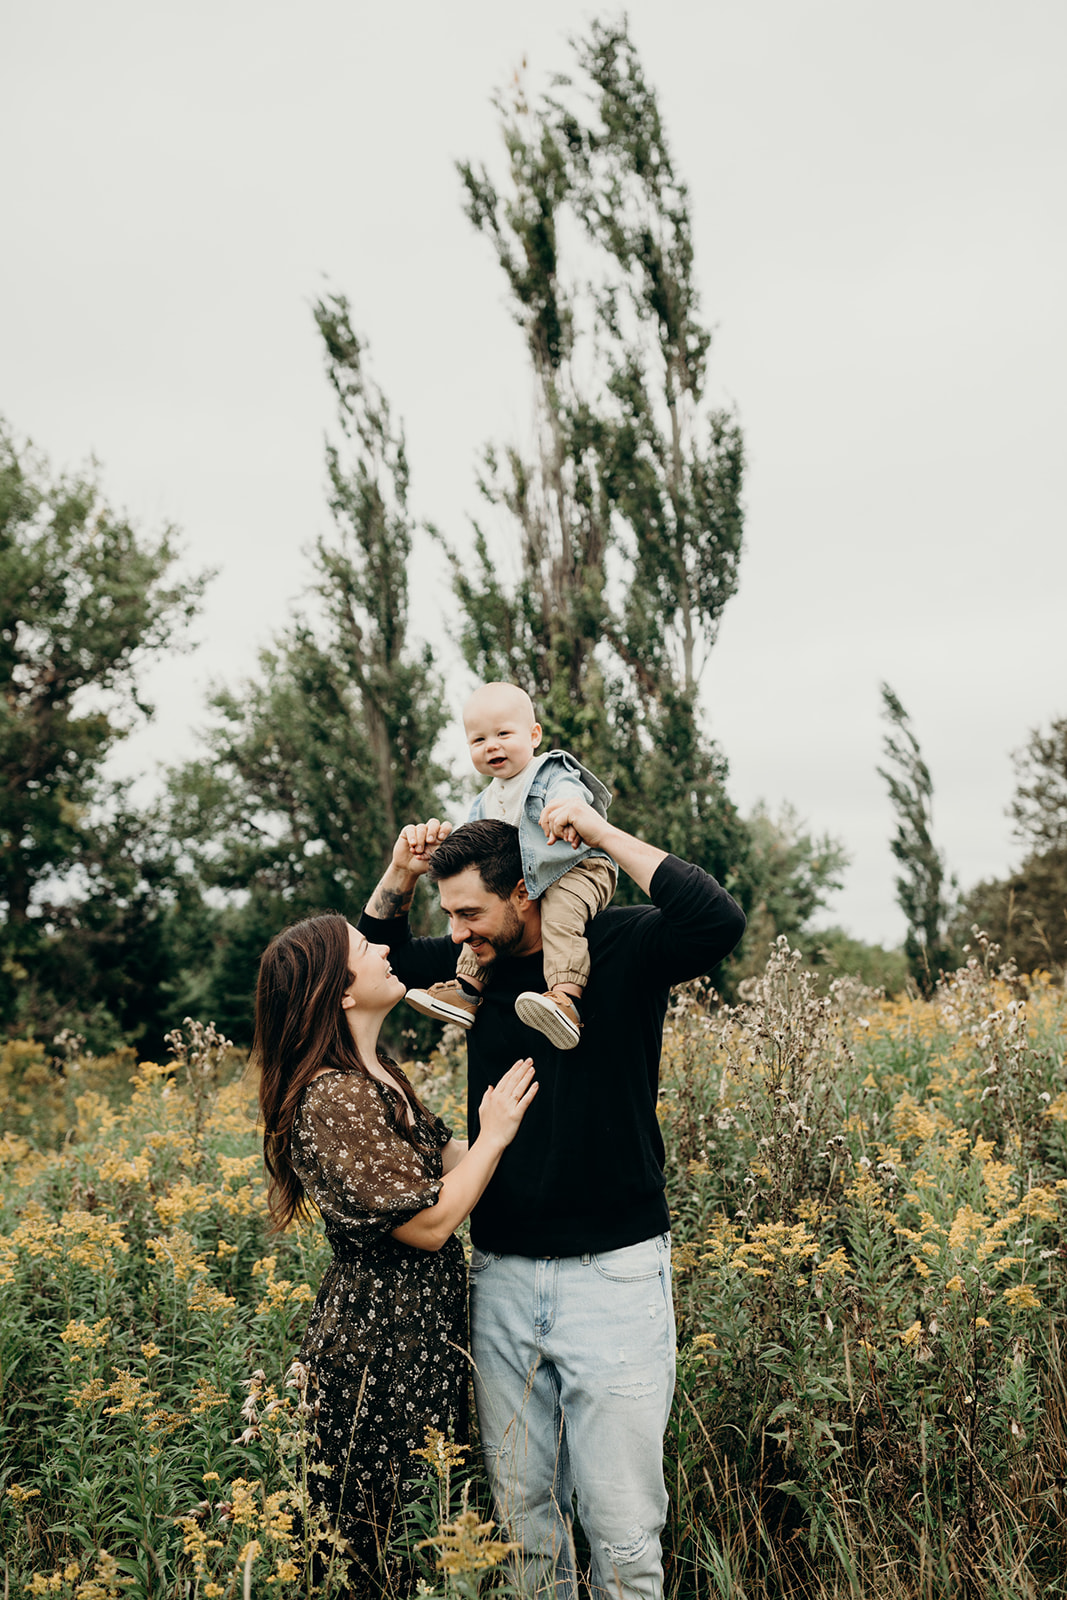 Mom and Dad pose with small child during family photoshoot